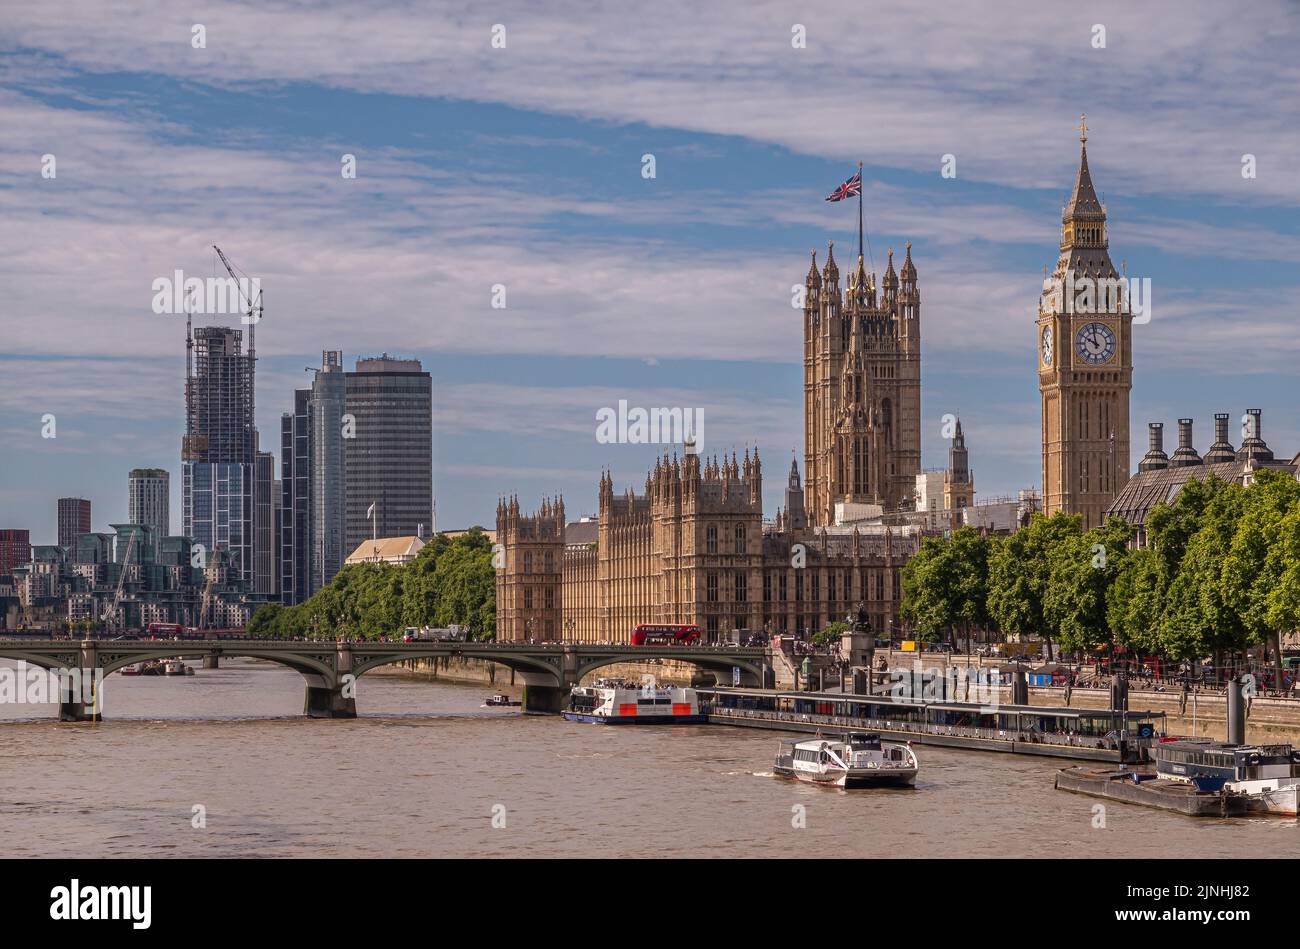 London, UK - July 4, 2022: Wide scenery with Palace of Westminster, House of Lords, Big Ben, church towers, and further city highrises under blue cllu Stock Photo